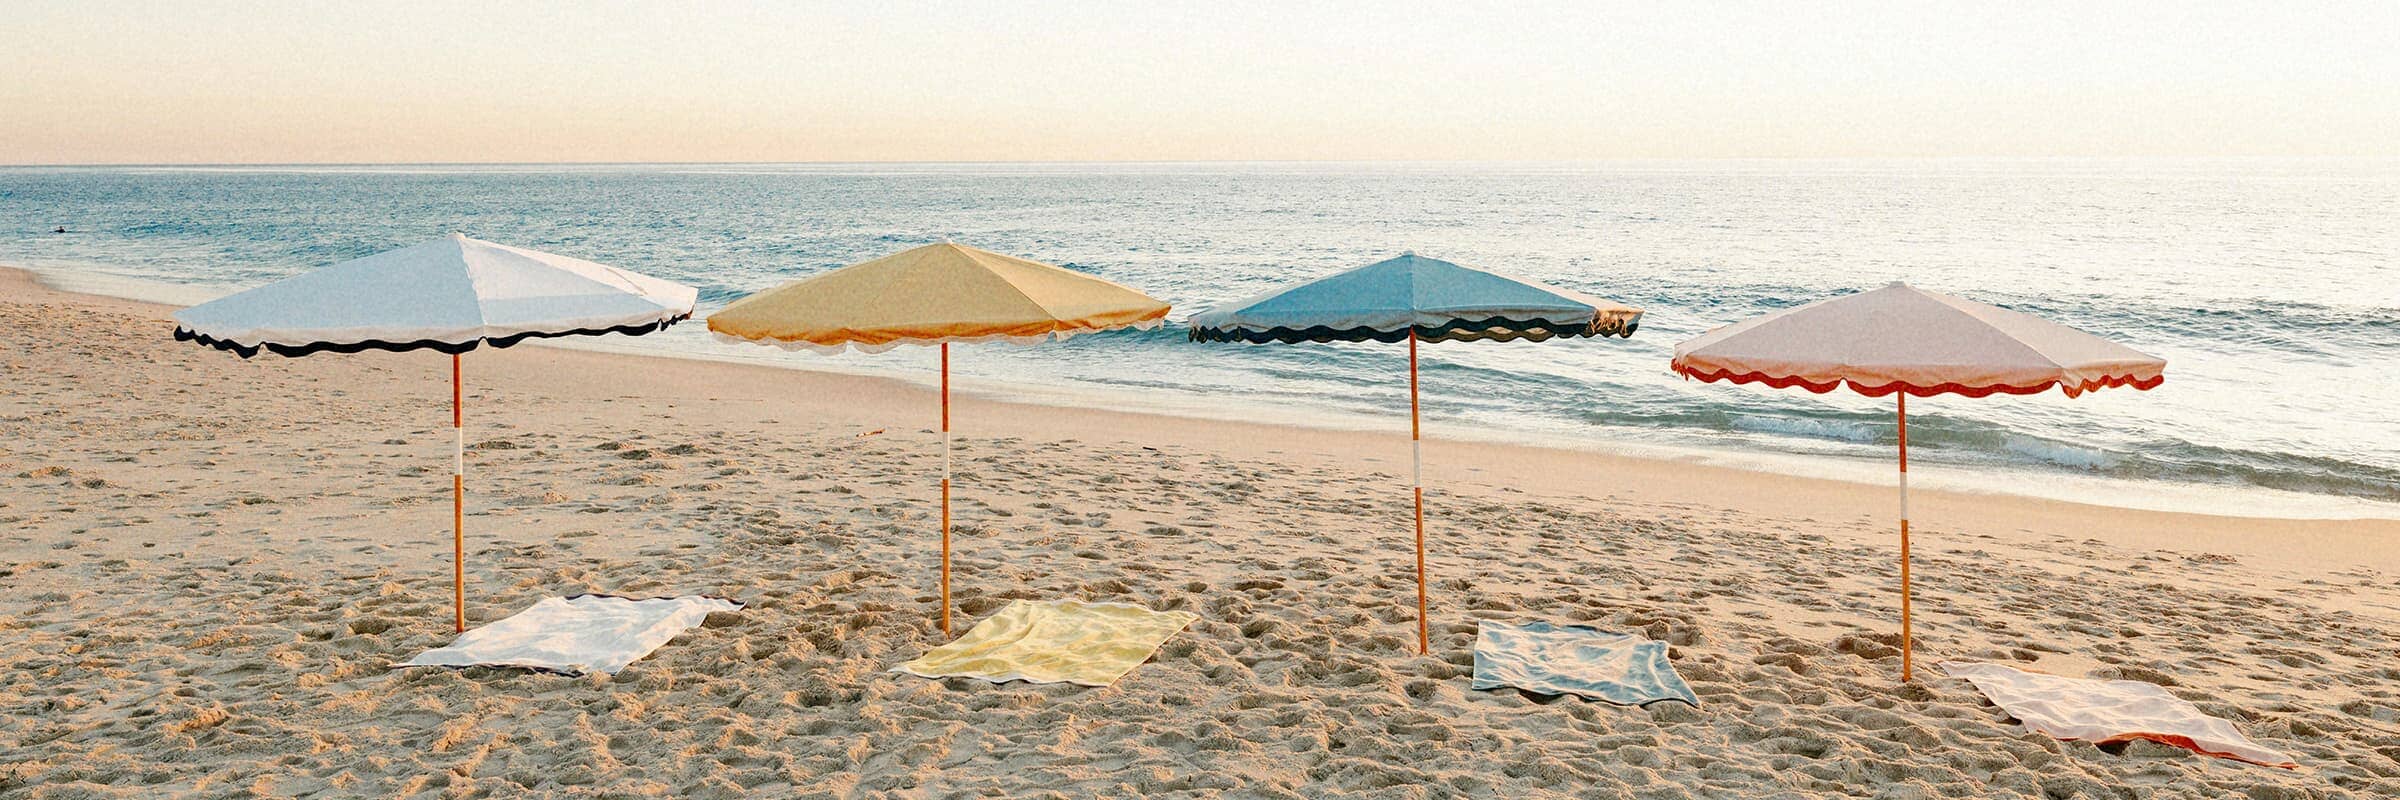 four colorful umbrellas on the sand at the beach with towels